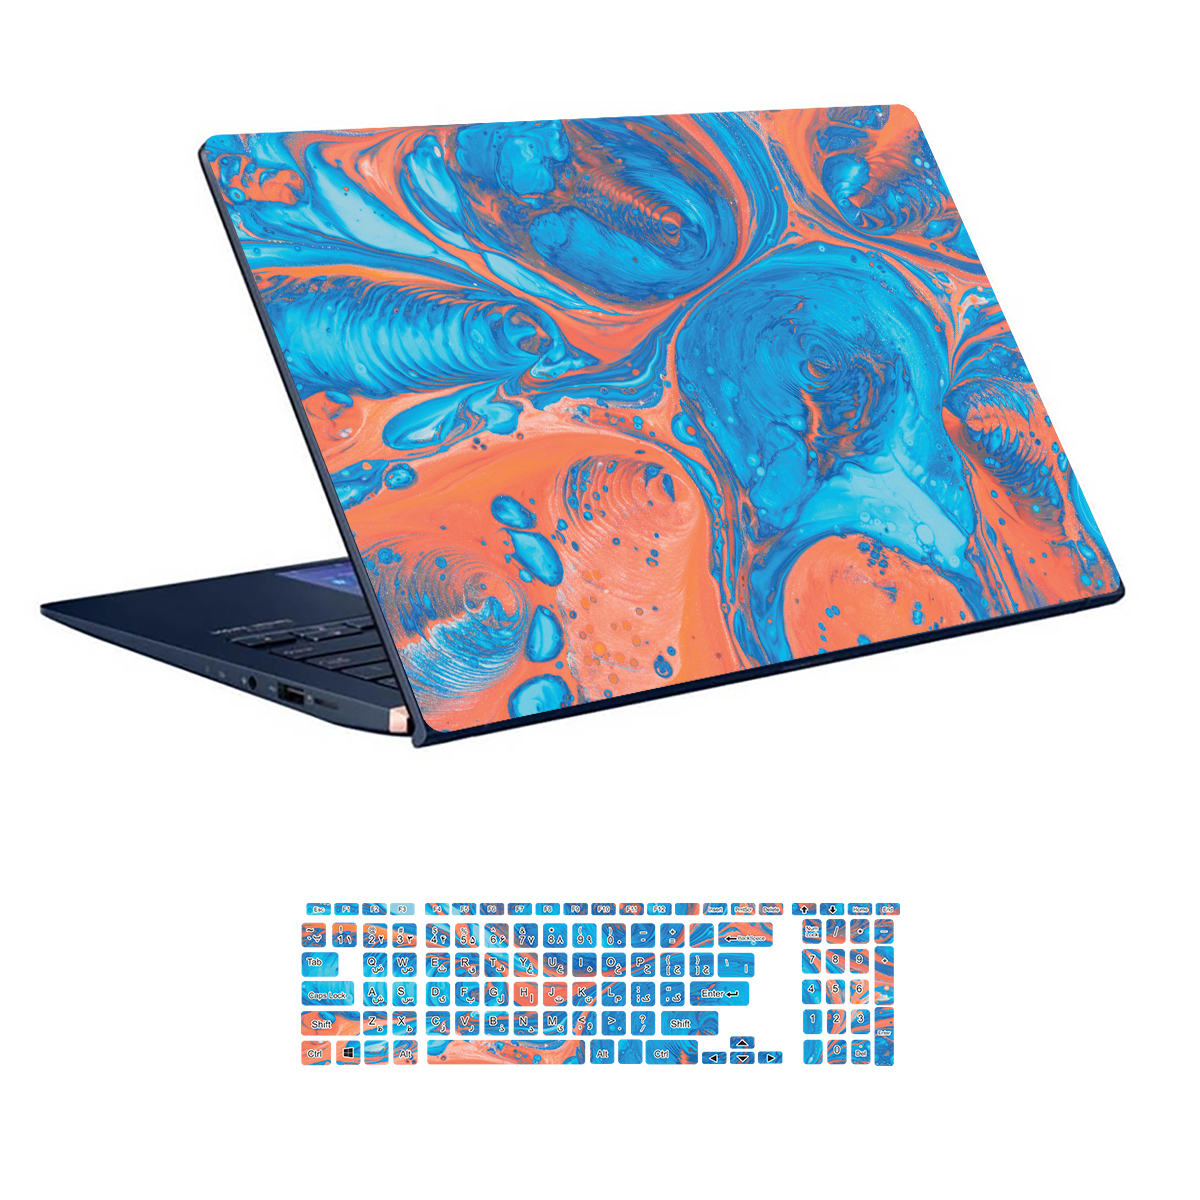 Colorful design laptop skin code 36 with keyboard sticker